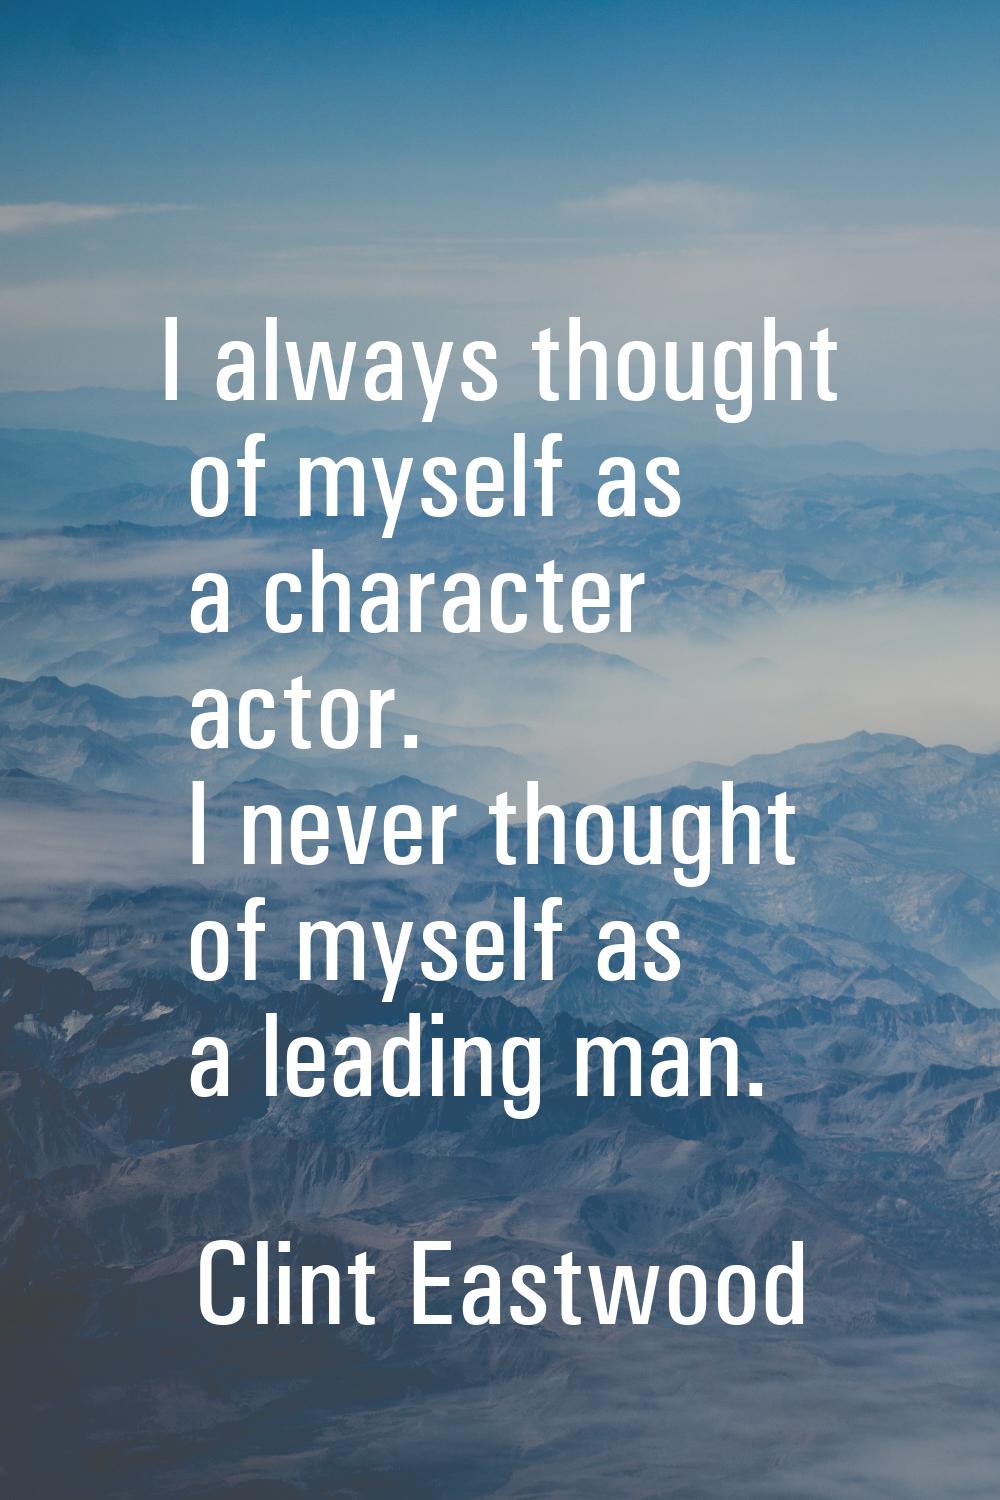 I always thought of myself as a character actor. I never thought of myself as a leading man.